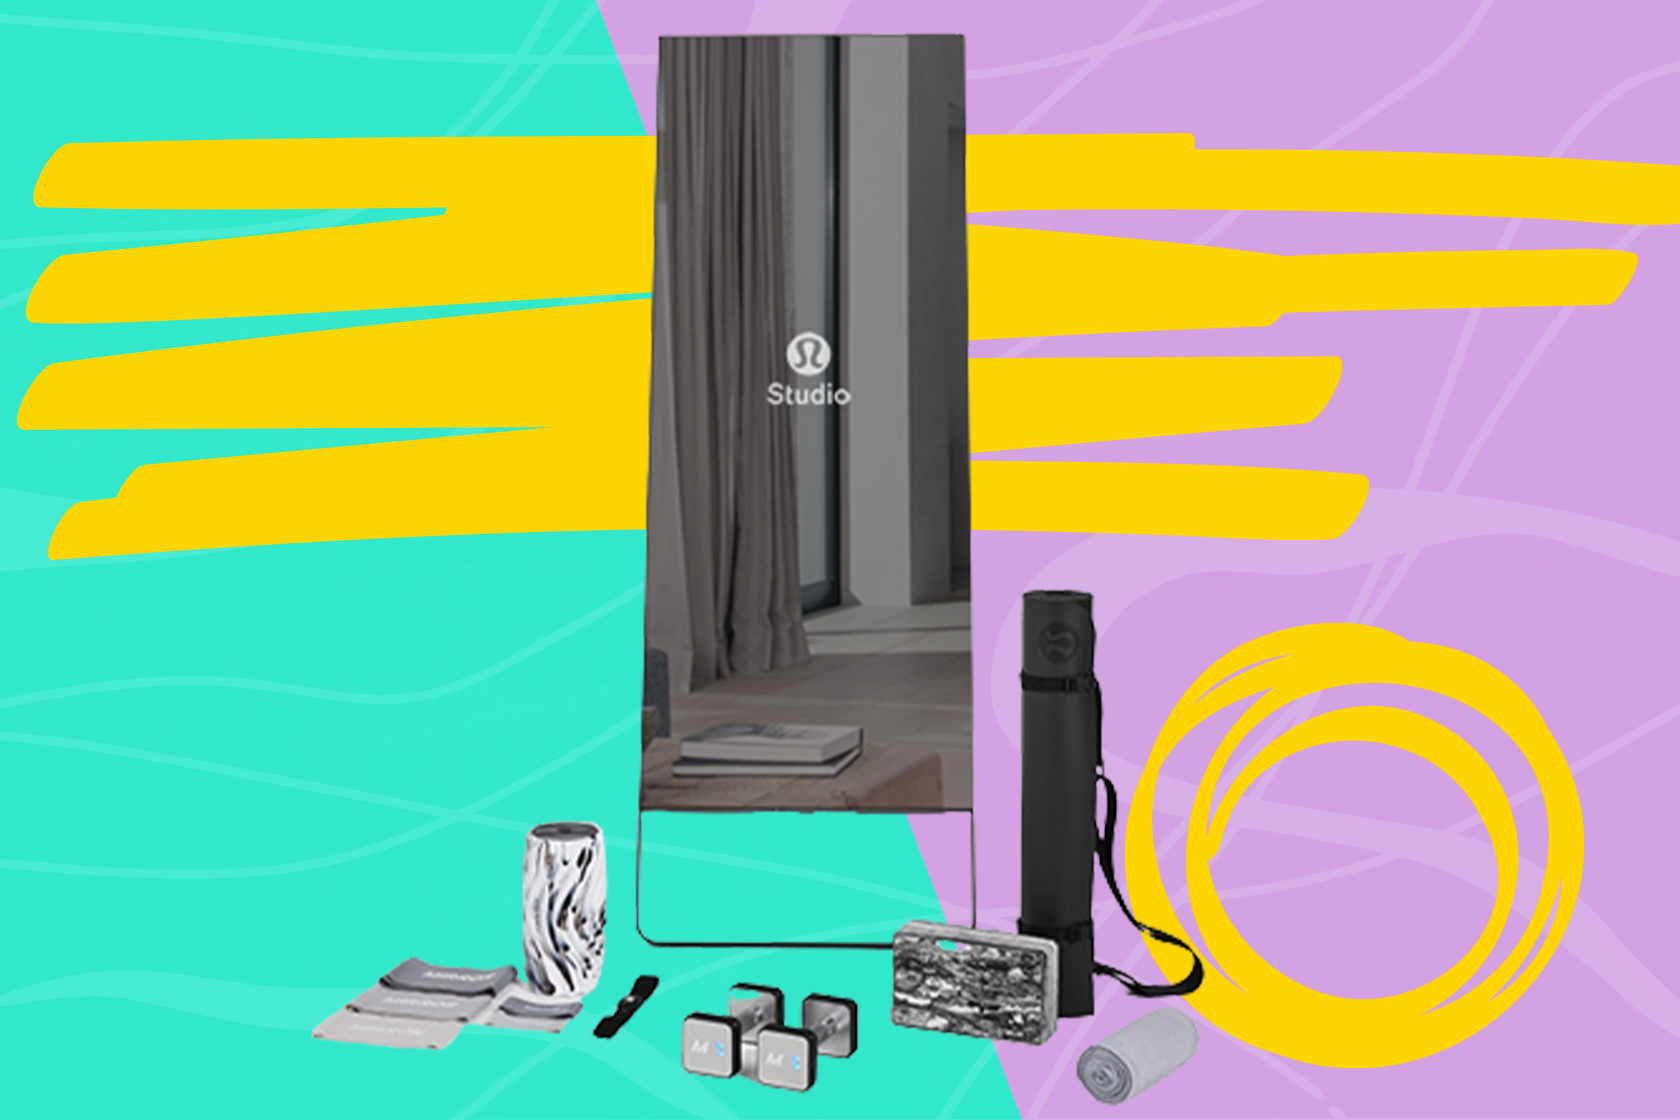 The lululemon Mirror comes with a bonus $200 gift card right now